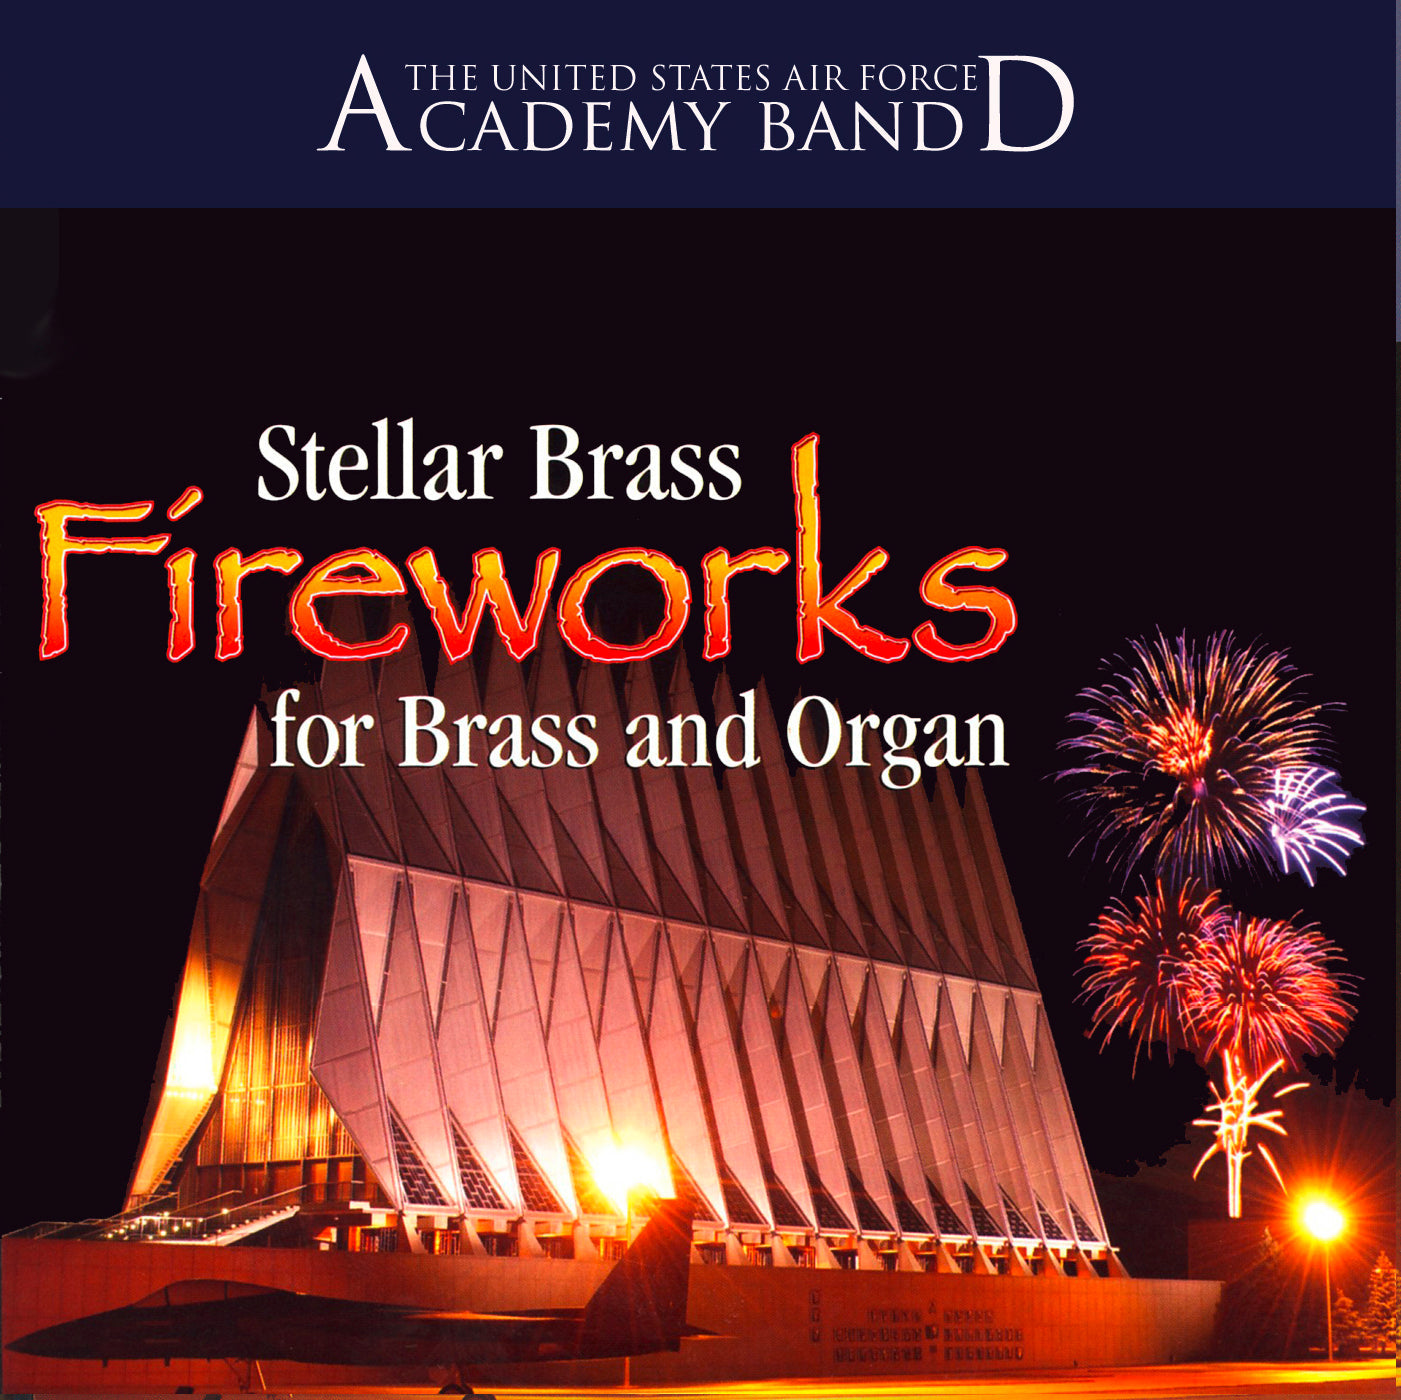 Fireworks For Brass and Organ / US Air Force Academy Band